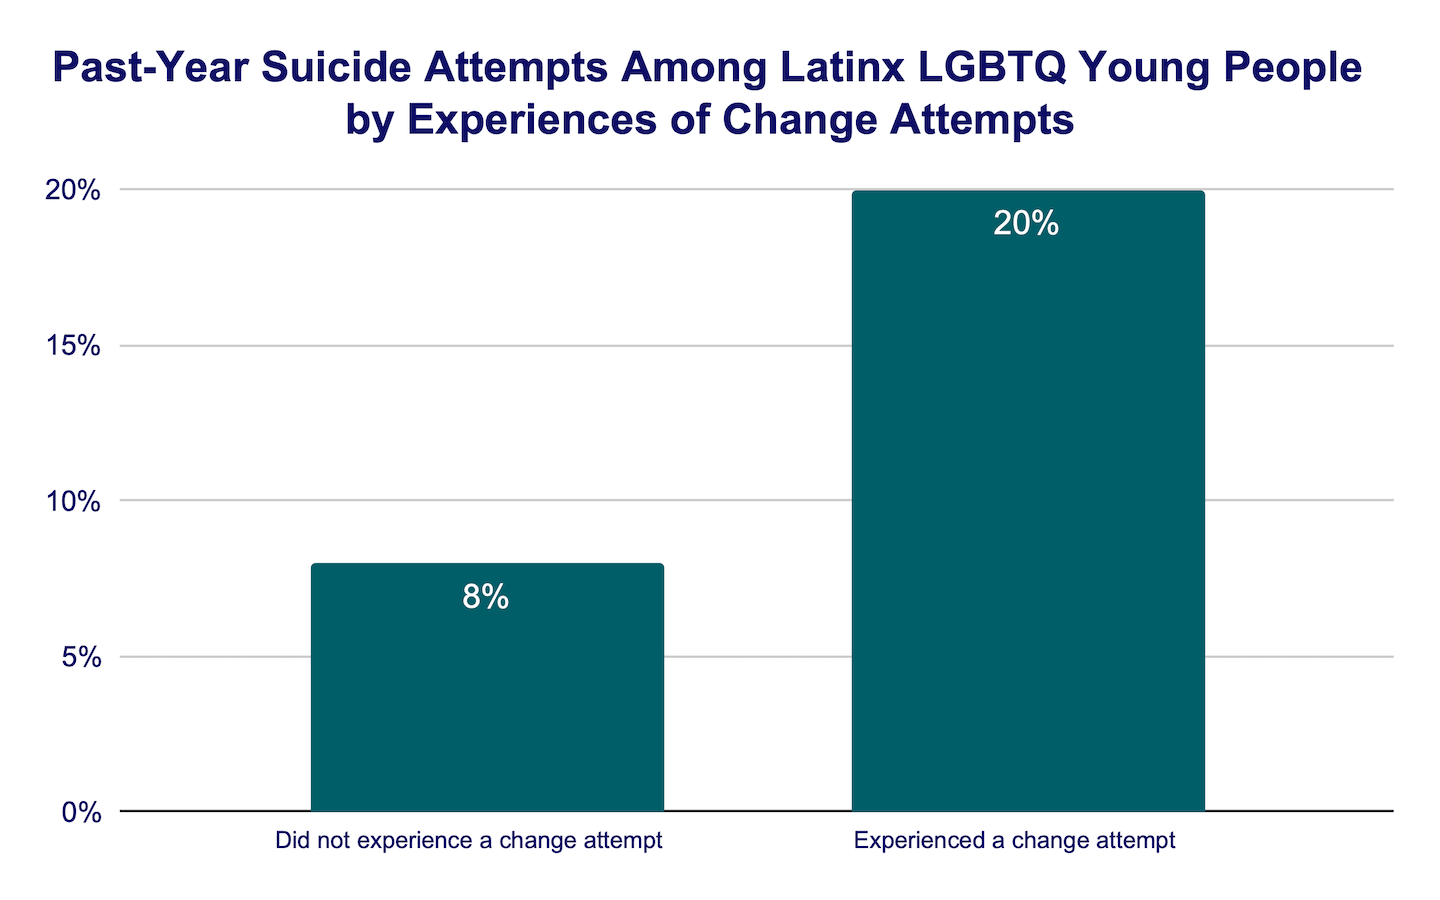 Past-year suicide attempts among Latinx LGBTQ young people by experiences of change attempts bar graph